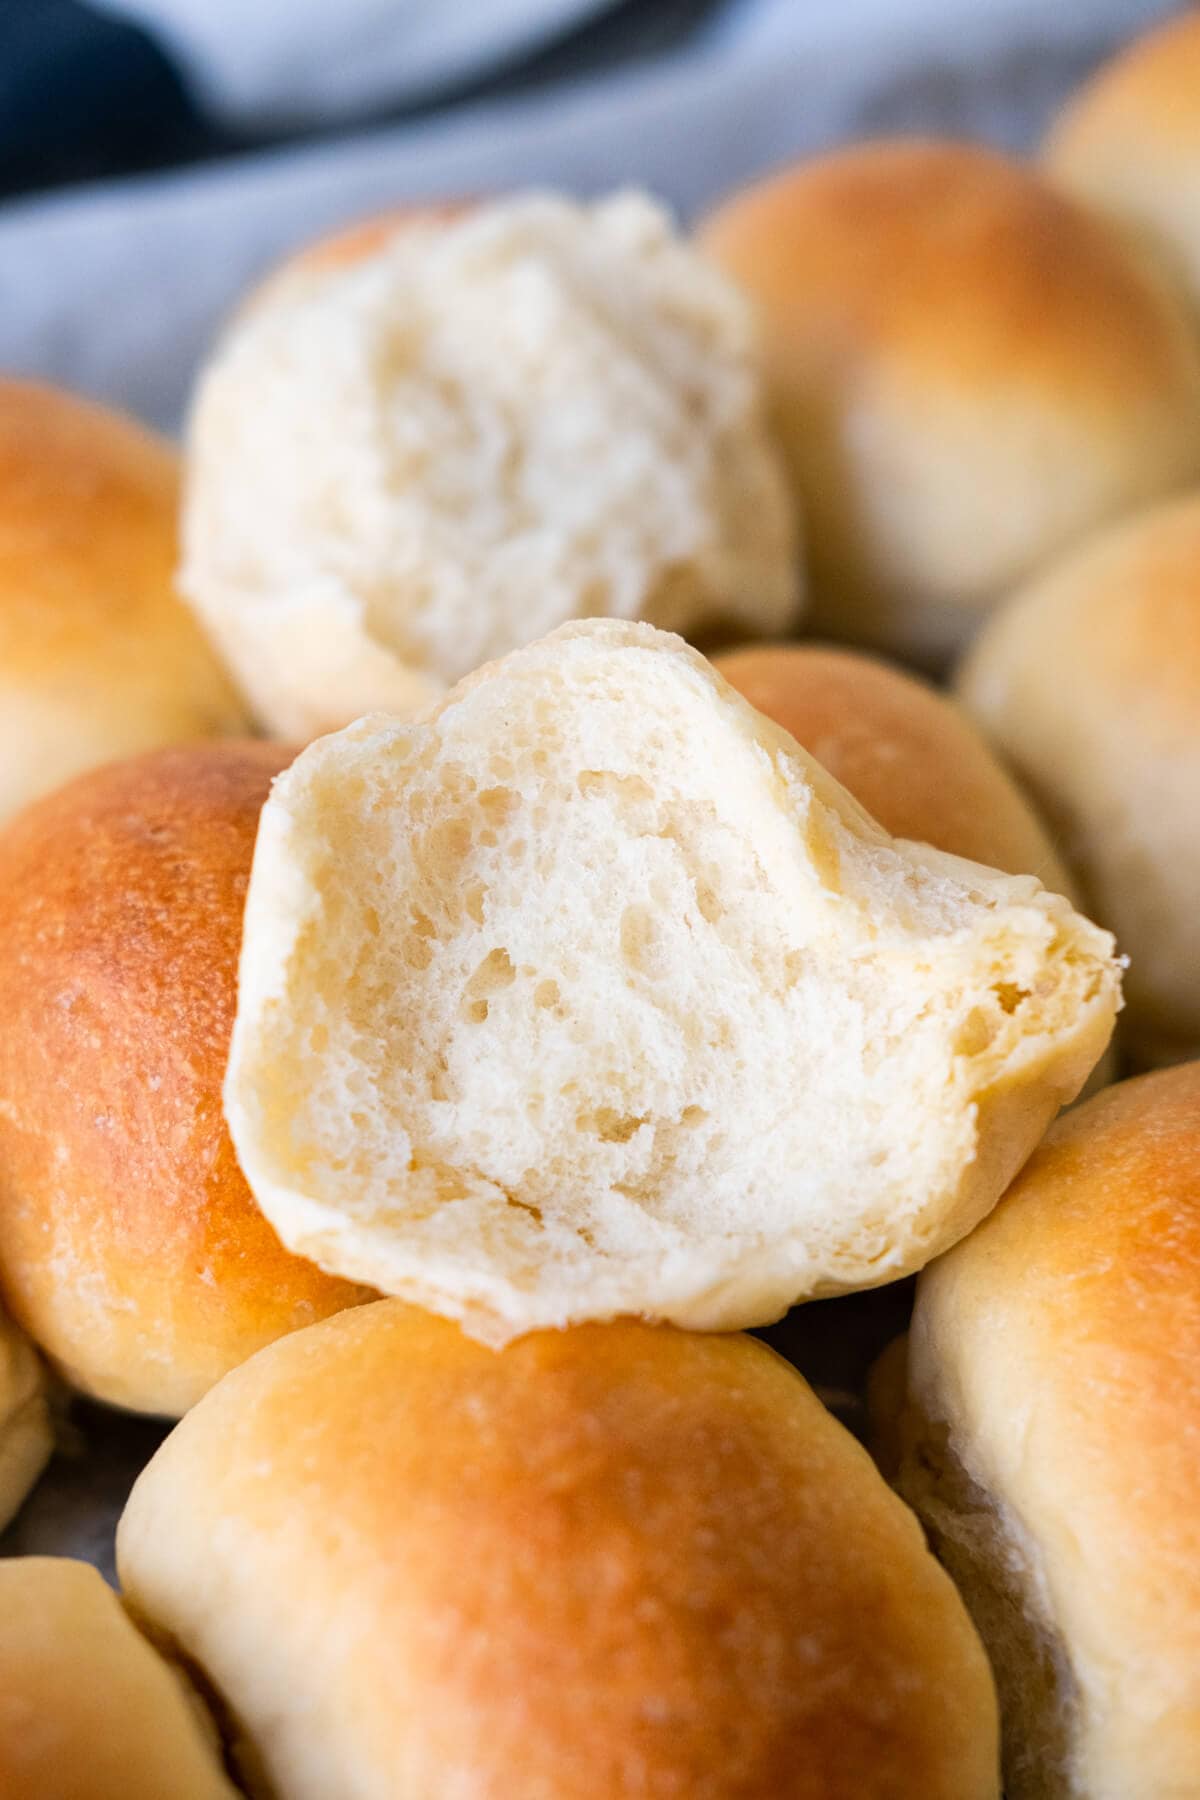 A half cut opened round bun with fluffy white soft on the interior and golden brown exterior.